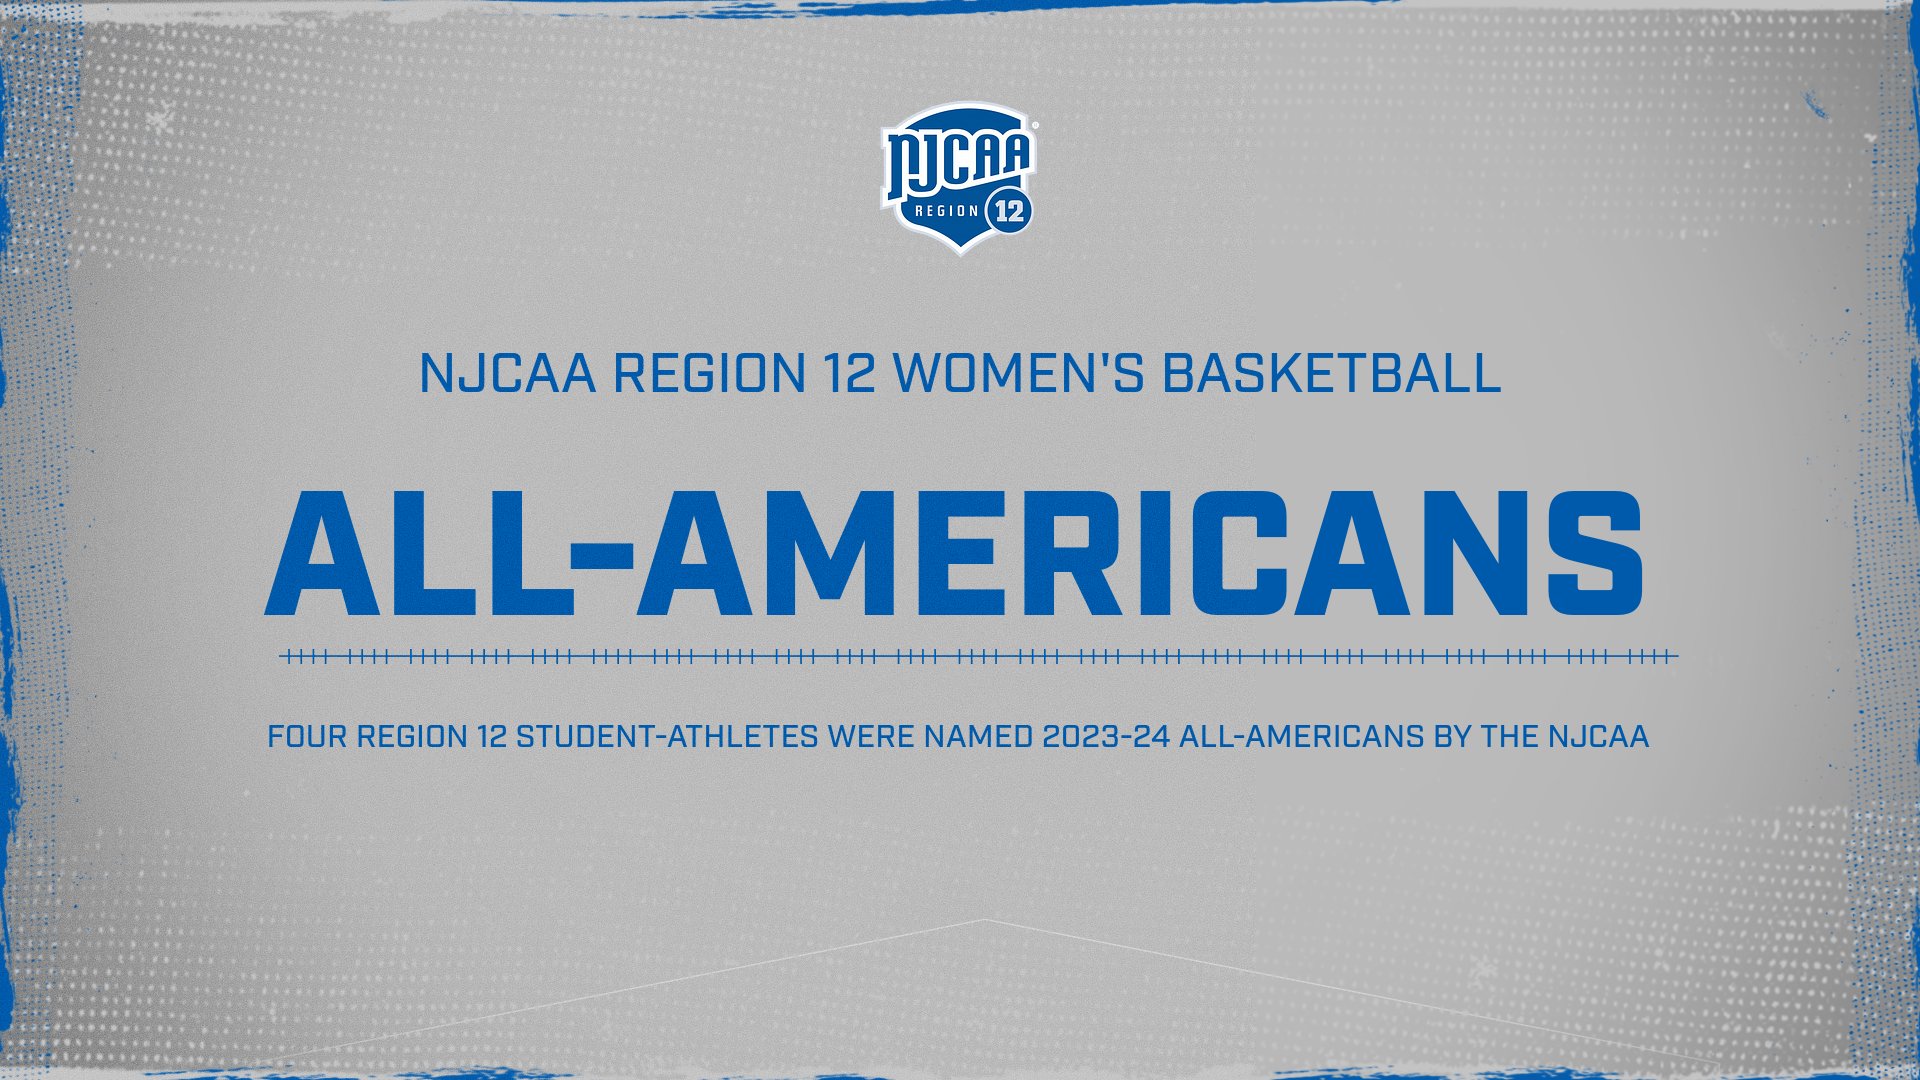 Women&rsquo;s Basketball All-Americans Announced, Four Region 12 Student-Athletes Recognized